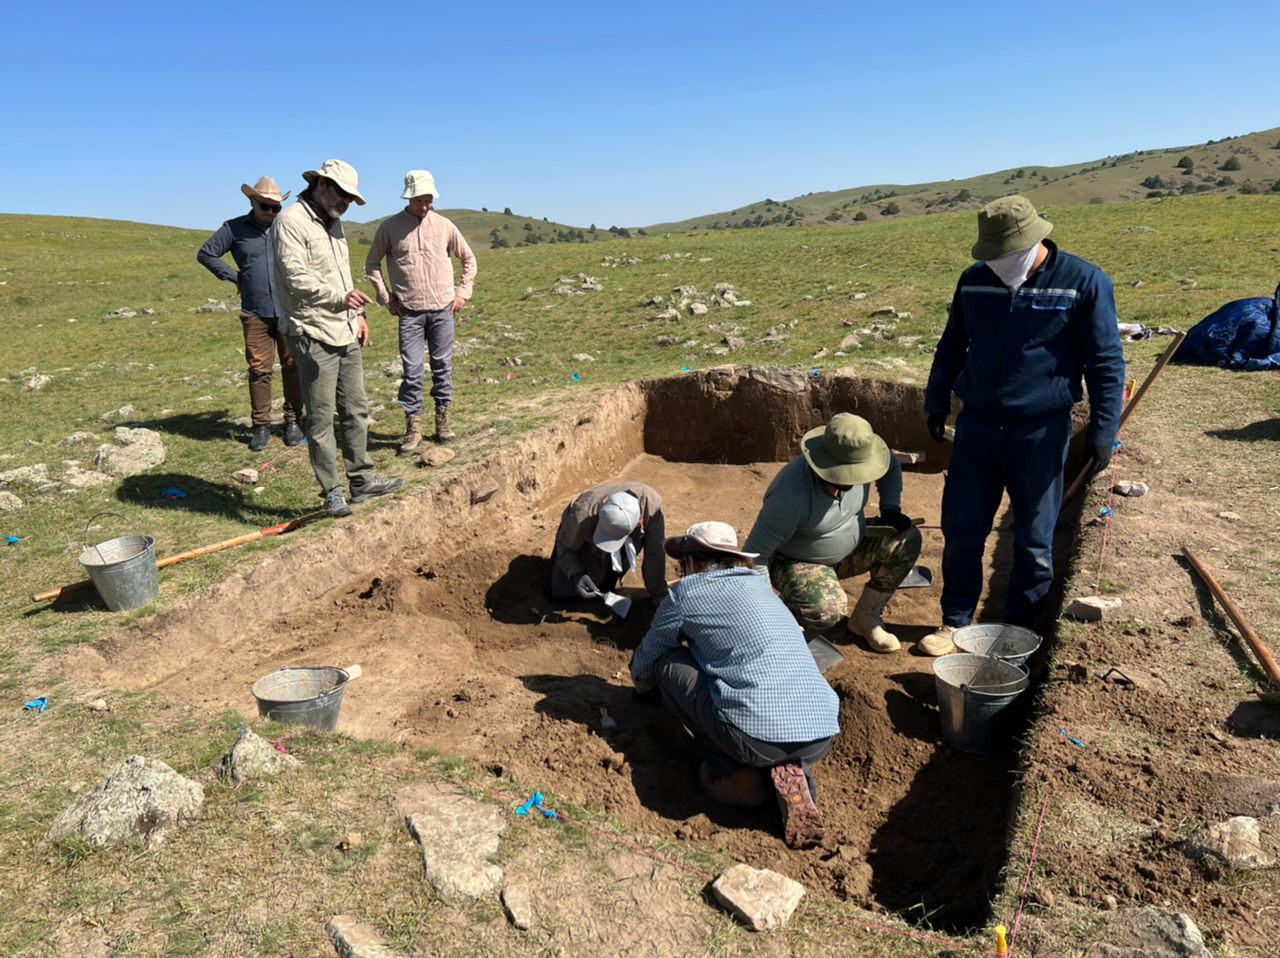 Comprehensive research at the archaeological site of Tugunbulak